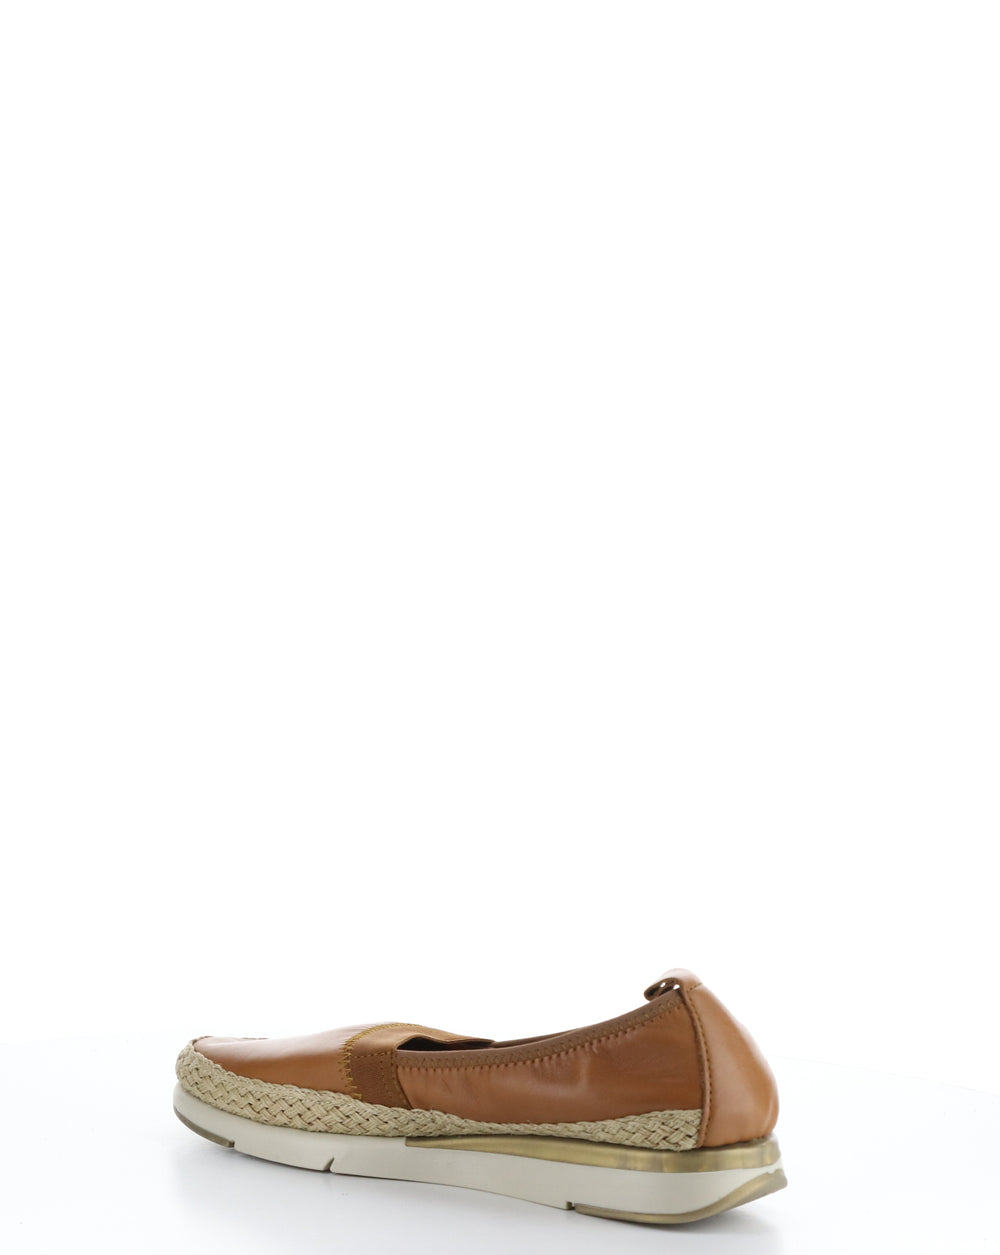 FASTEST TAN Round Toe Shoes